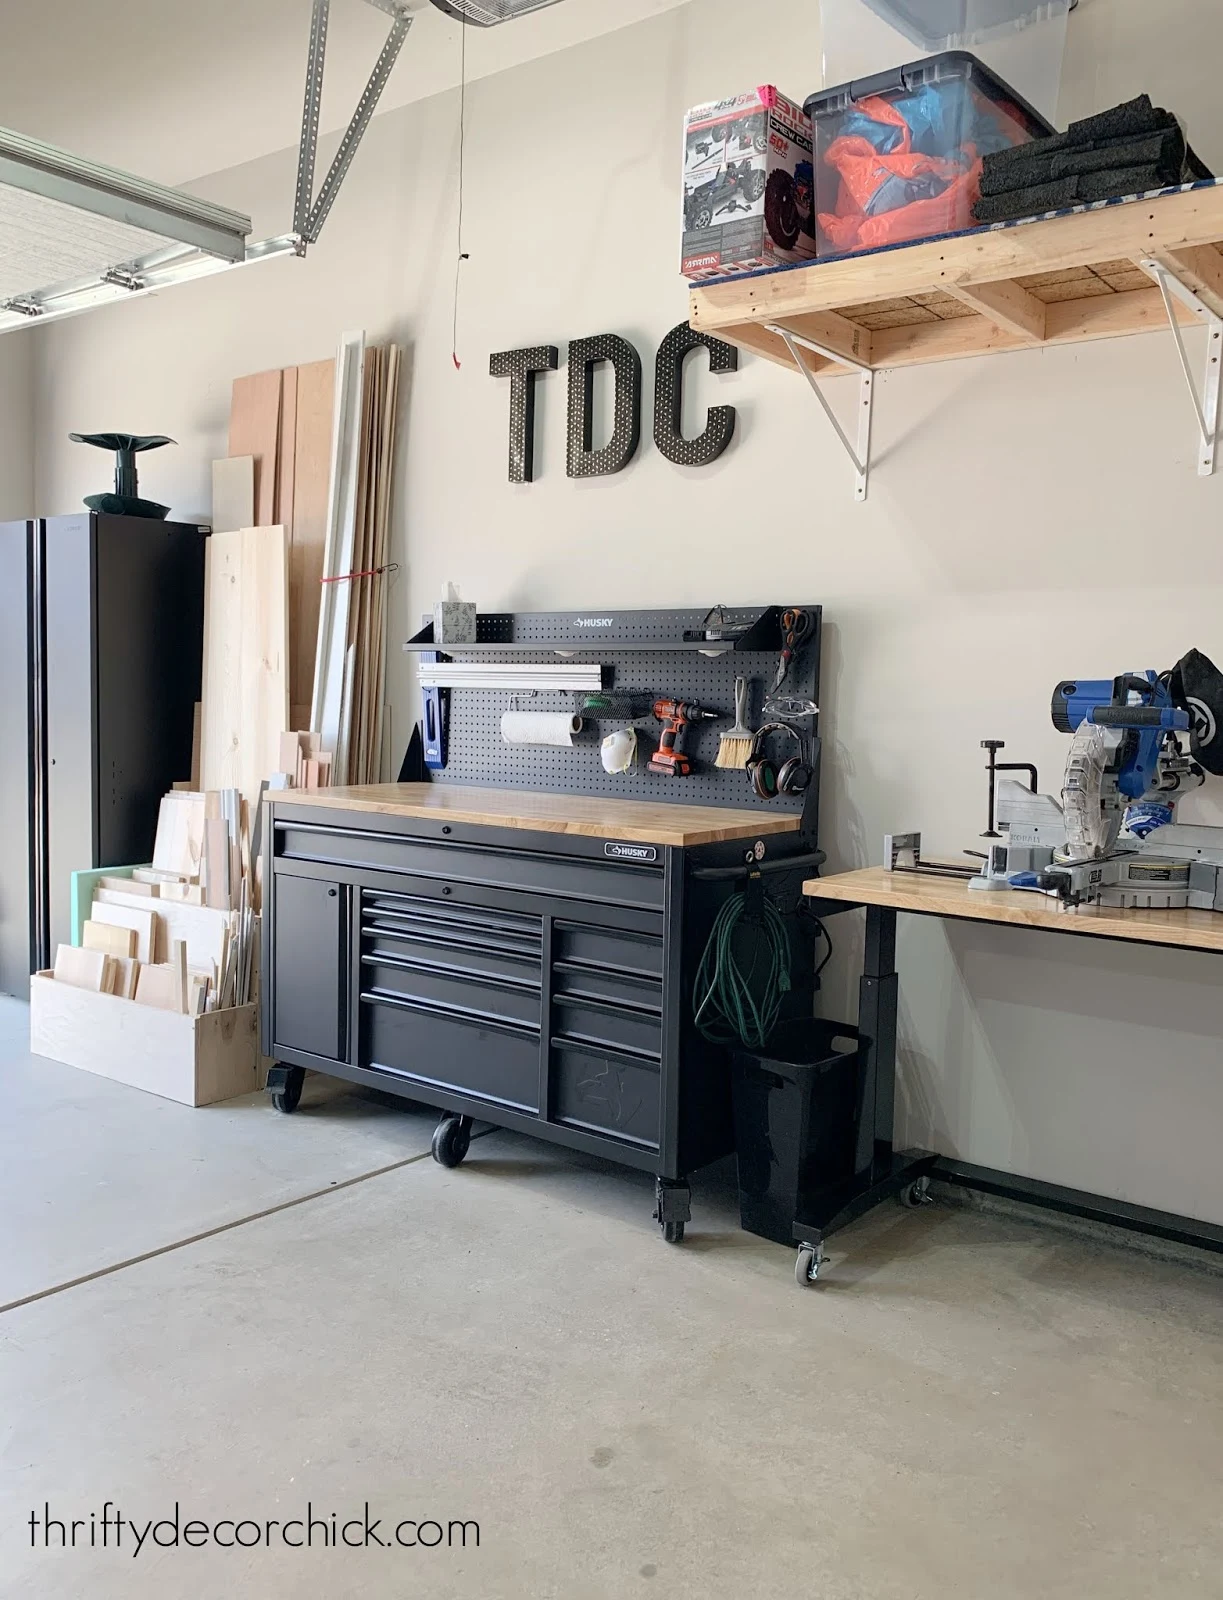 Garage Organization: Tackling Our Crazy Mess of a Garage - Driven by Decor